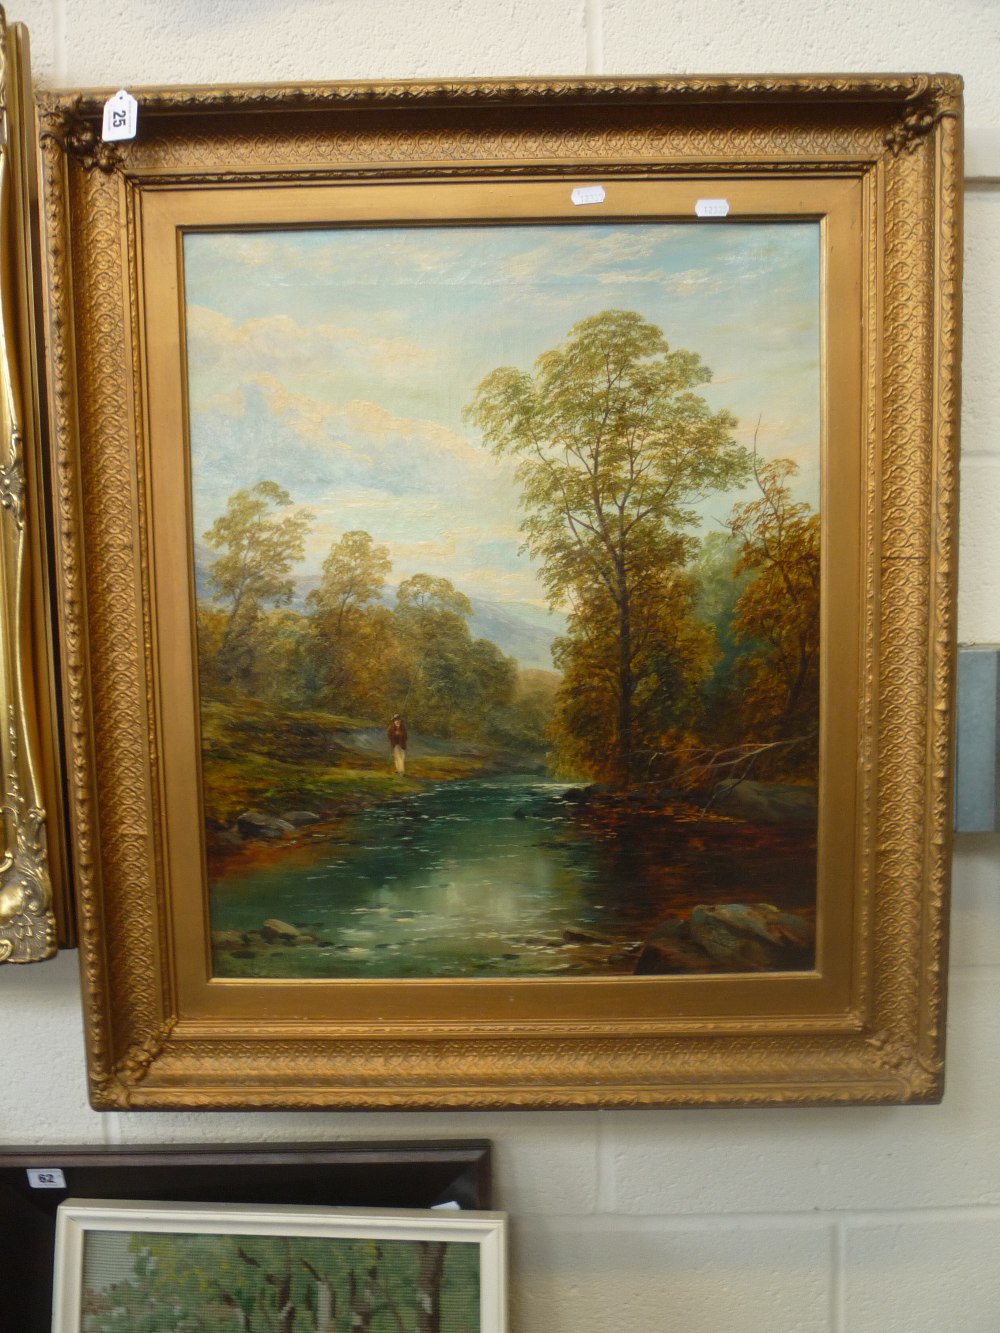 D. PAYNE, circa 1875, riverscape with woodland and hills and a lone fisherman, oil on canvas, signed